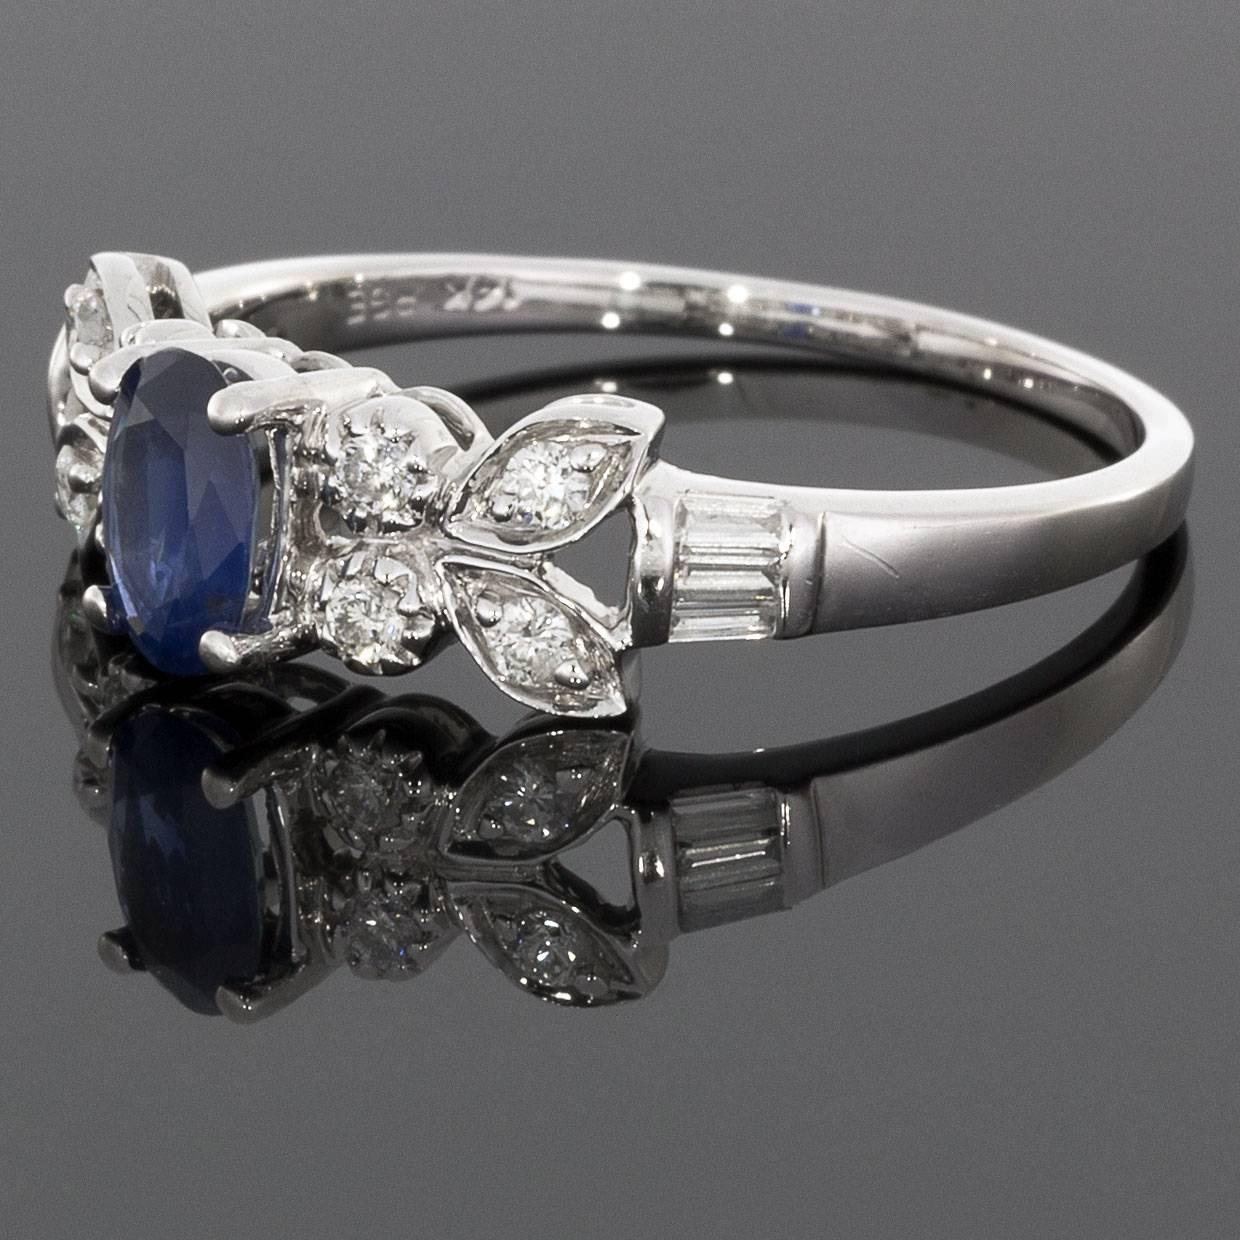 This luscious sapphire ring has a beautiful butterfly design that gives a really unique & elegant look. The ring features an oval cut, natural, blue sapphire center. The ring's shoulders are accented with round brilliant cut diamonds that are